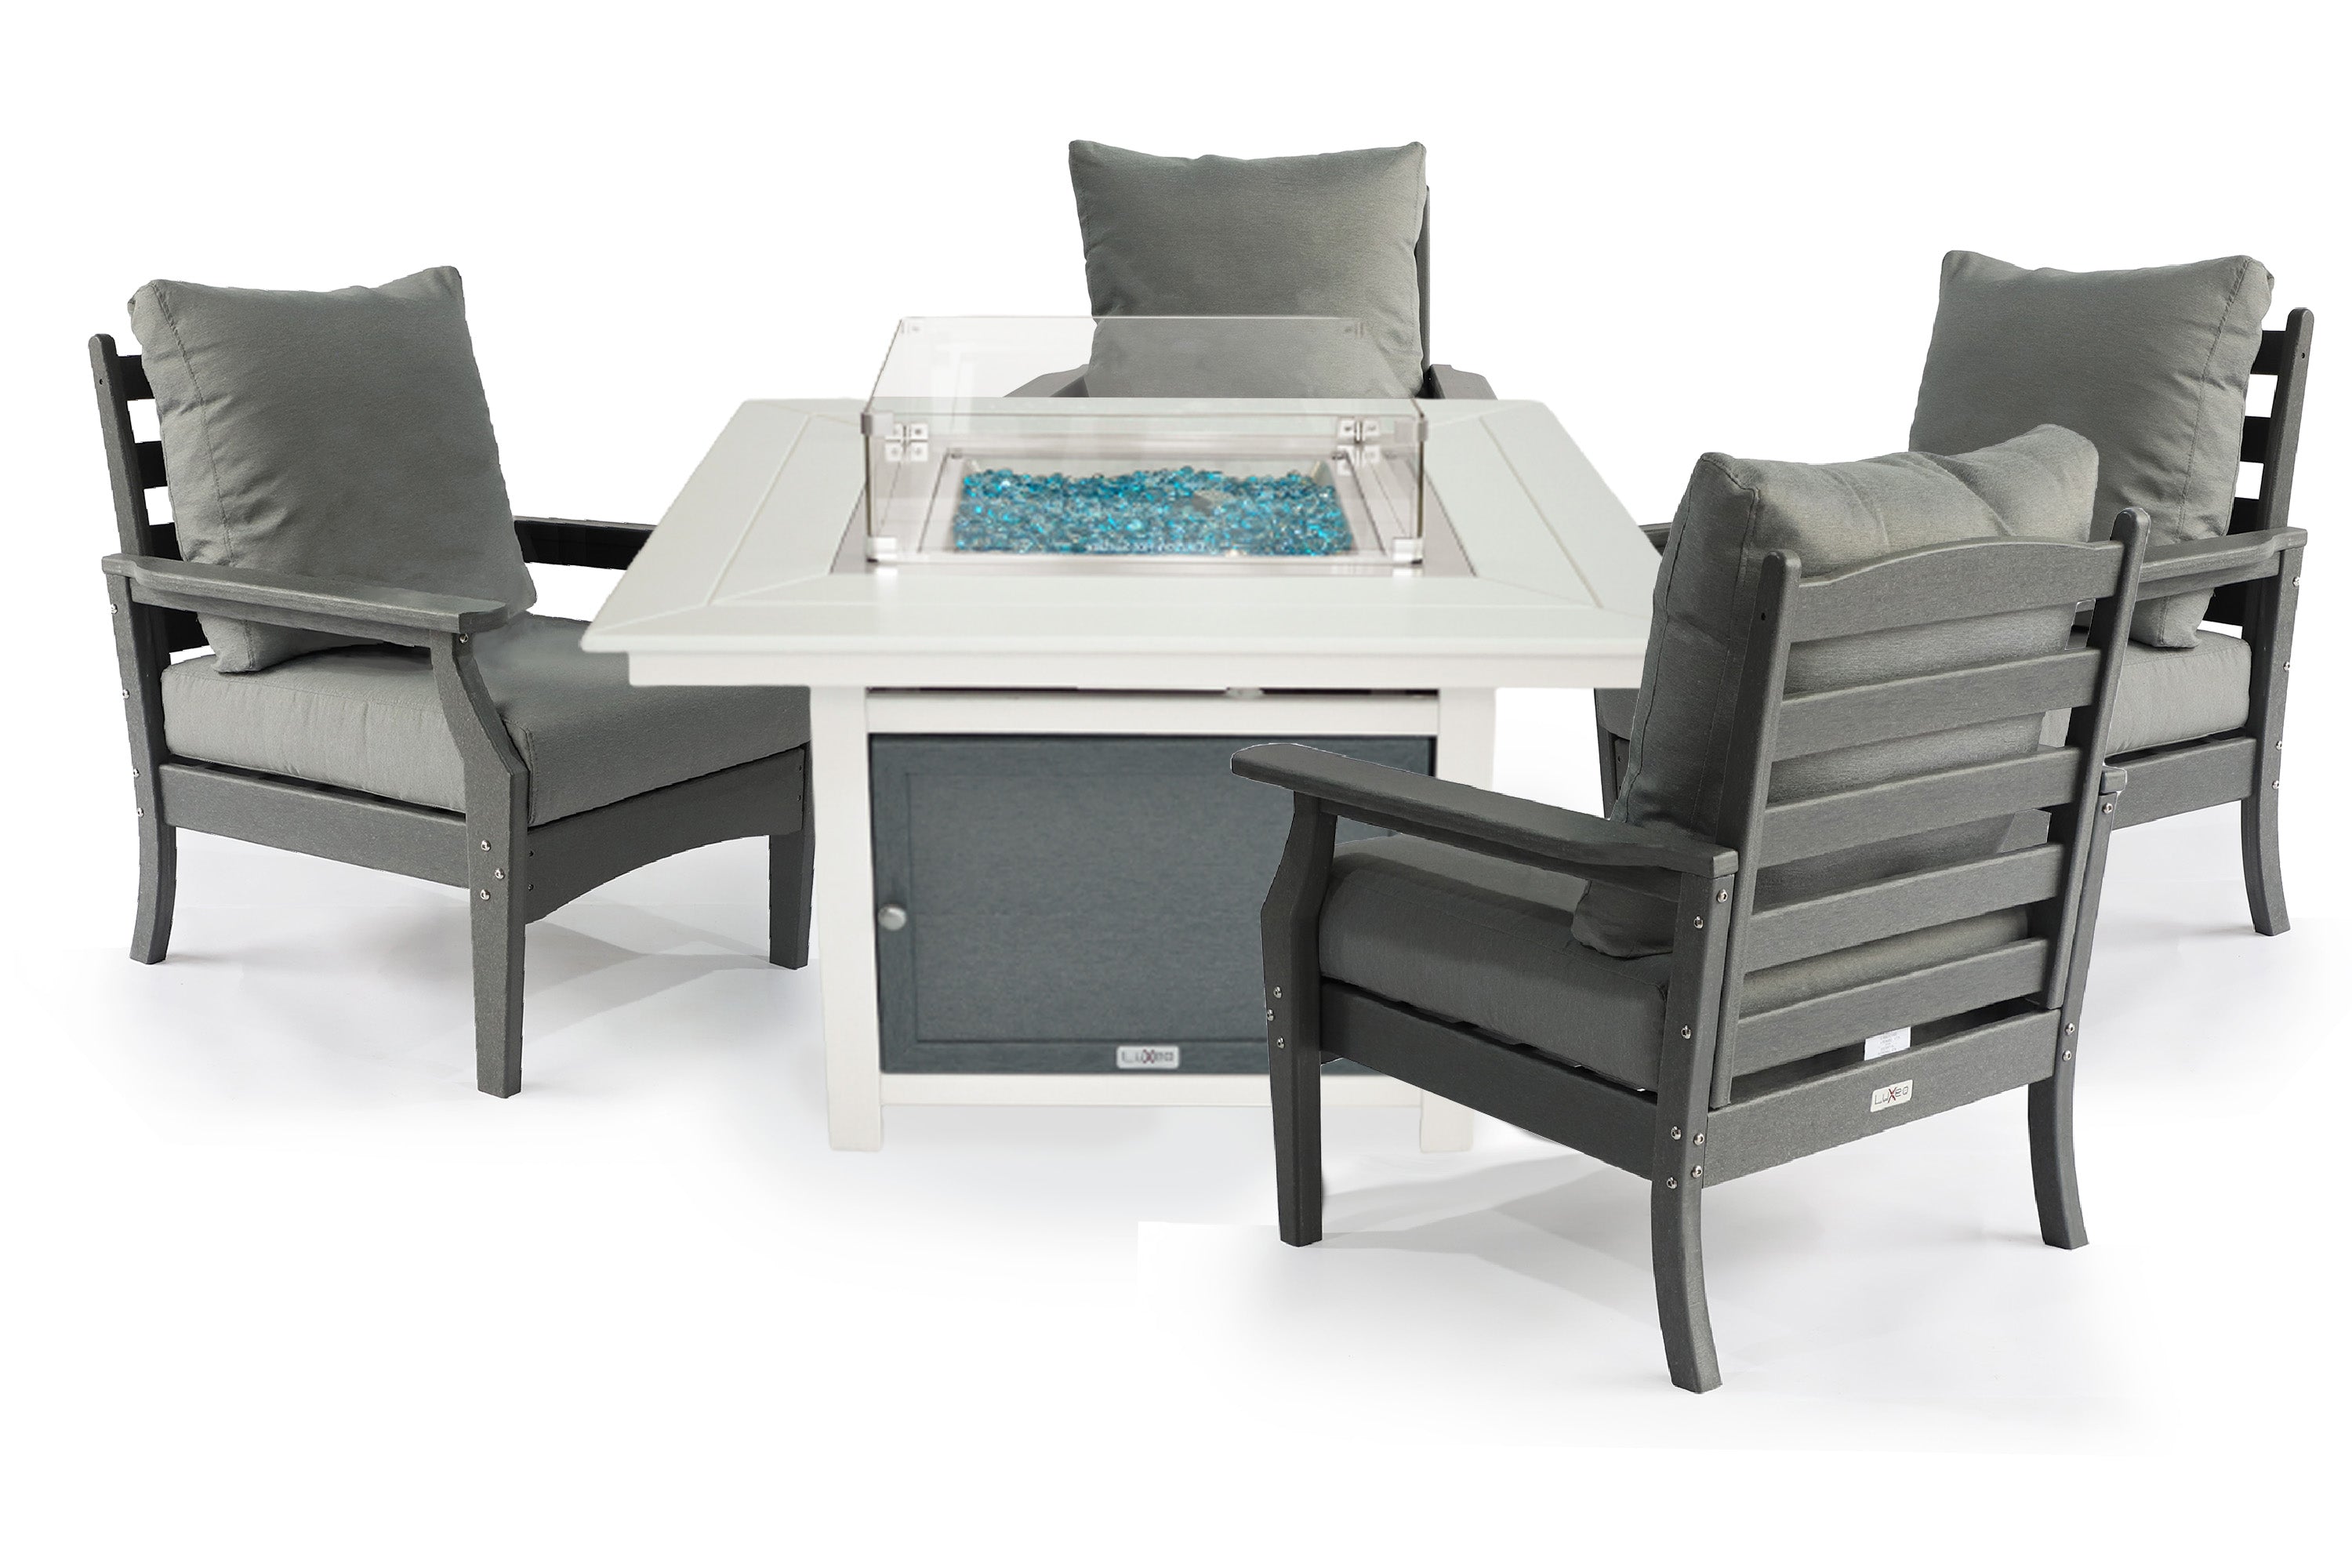 Park City 42" Two Tone Fire Pit, Square Top with Four Aspen Chairs